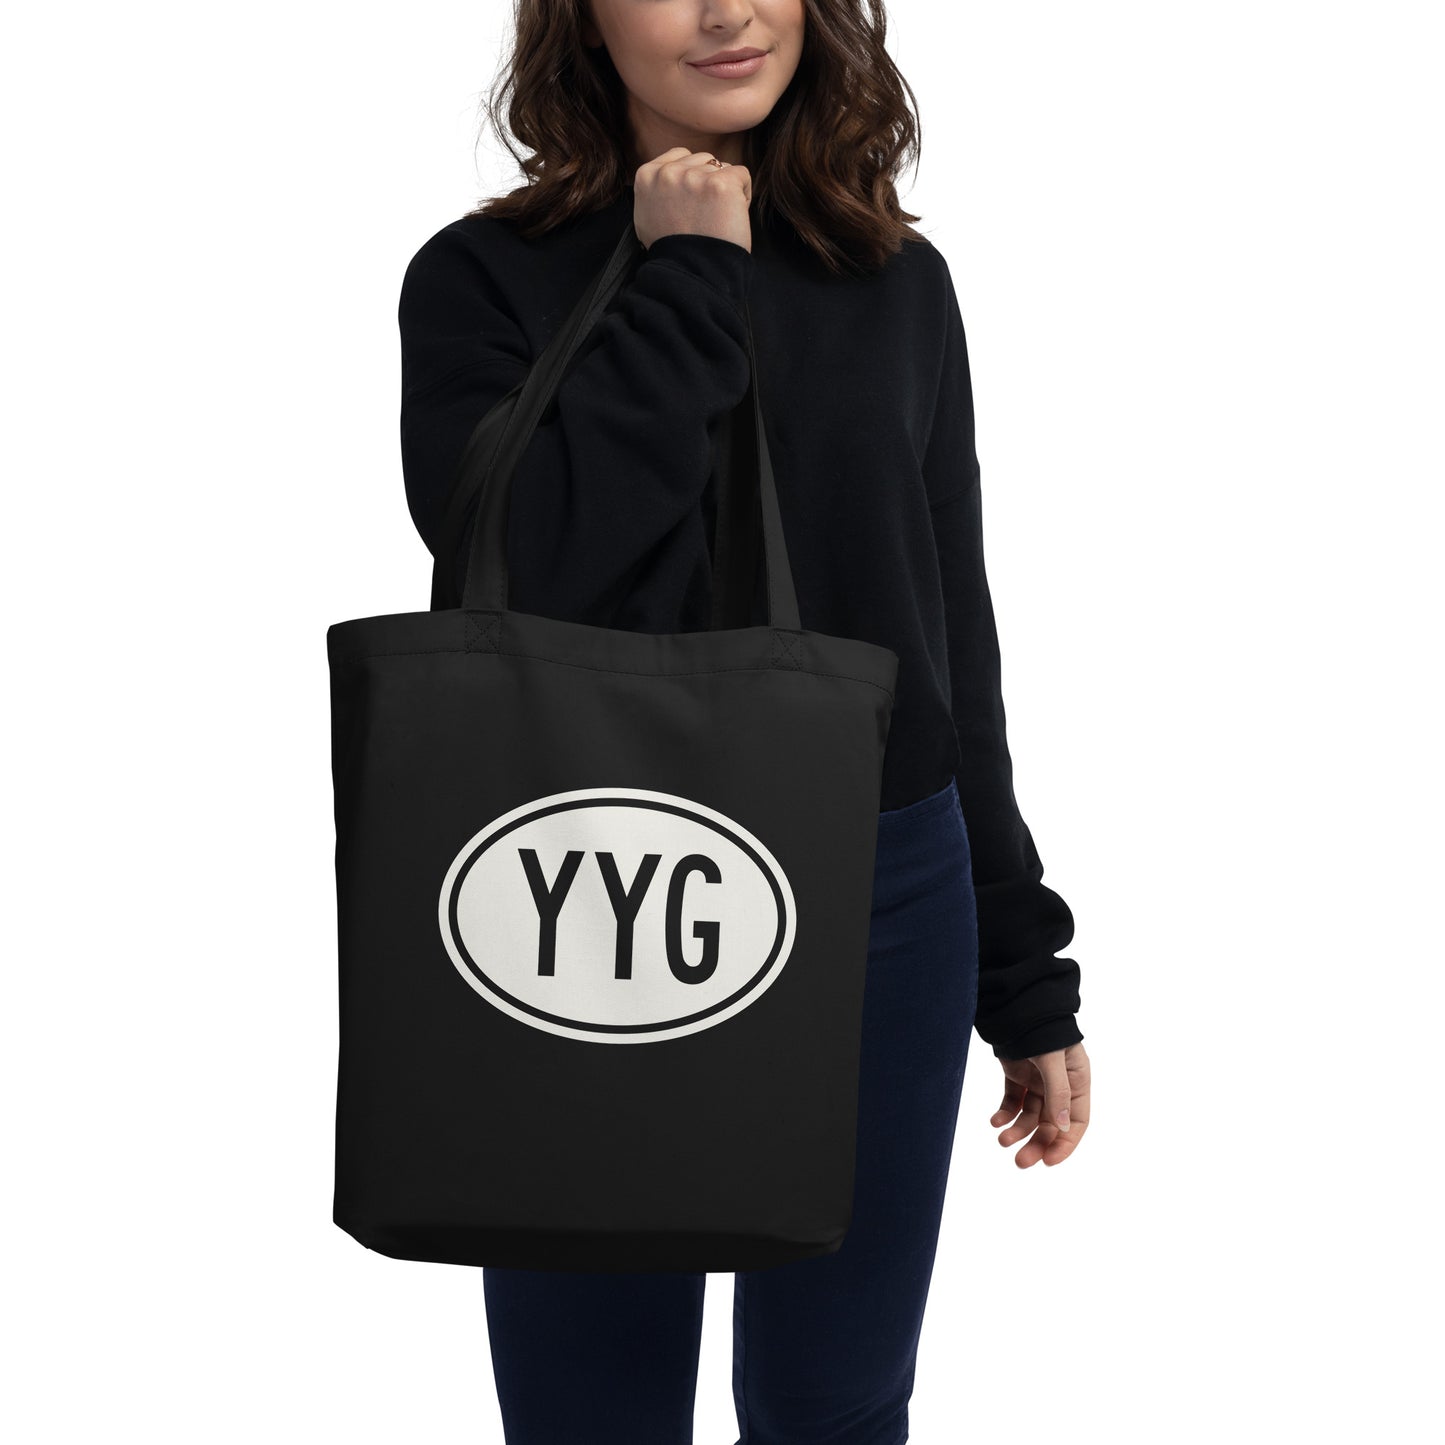 Unique Travel Gift Organic Tote - White Oval • YYG Charlottetown • YHM Designs - Image 03